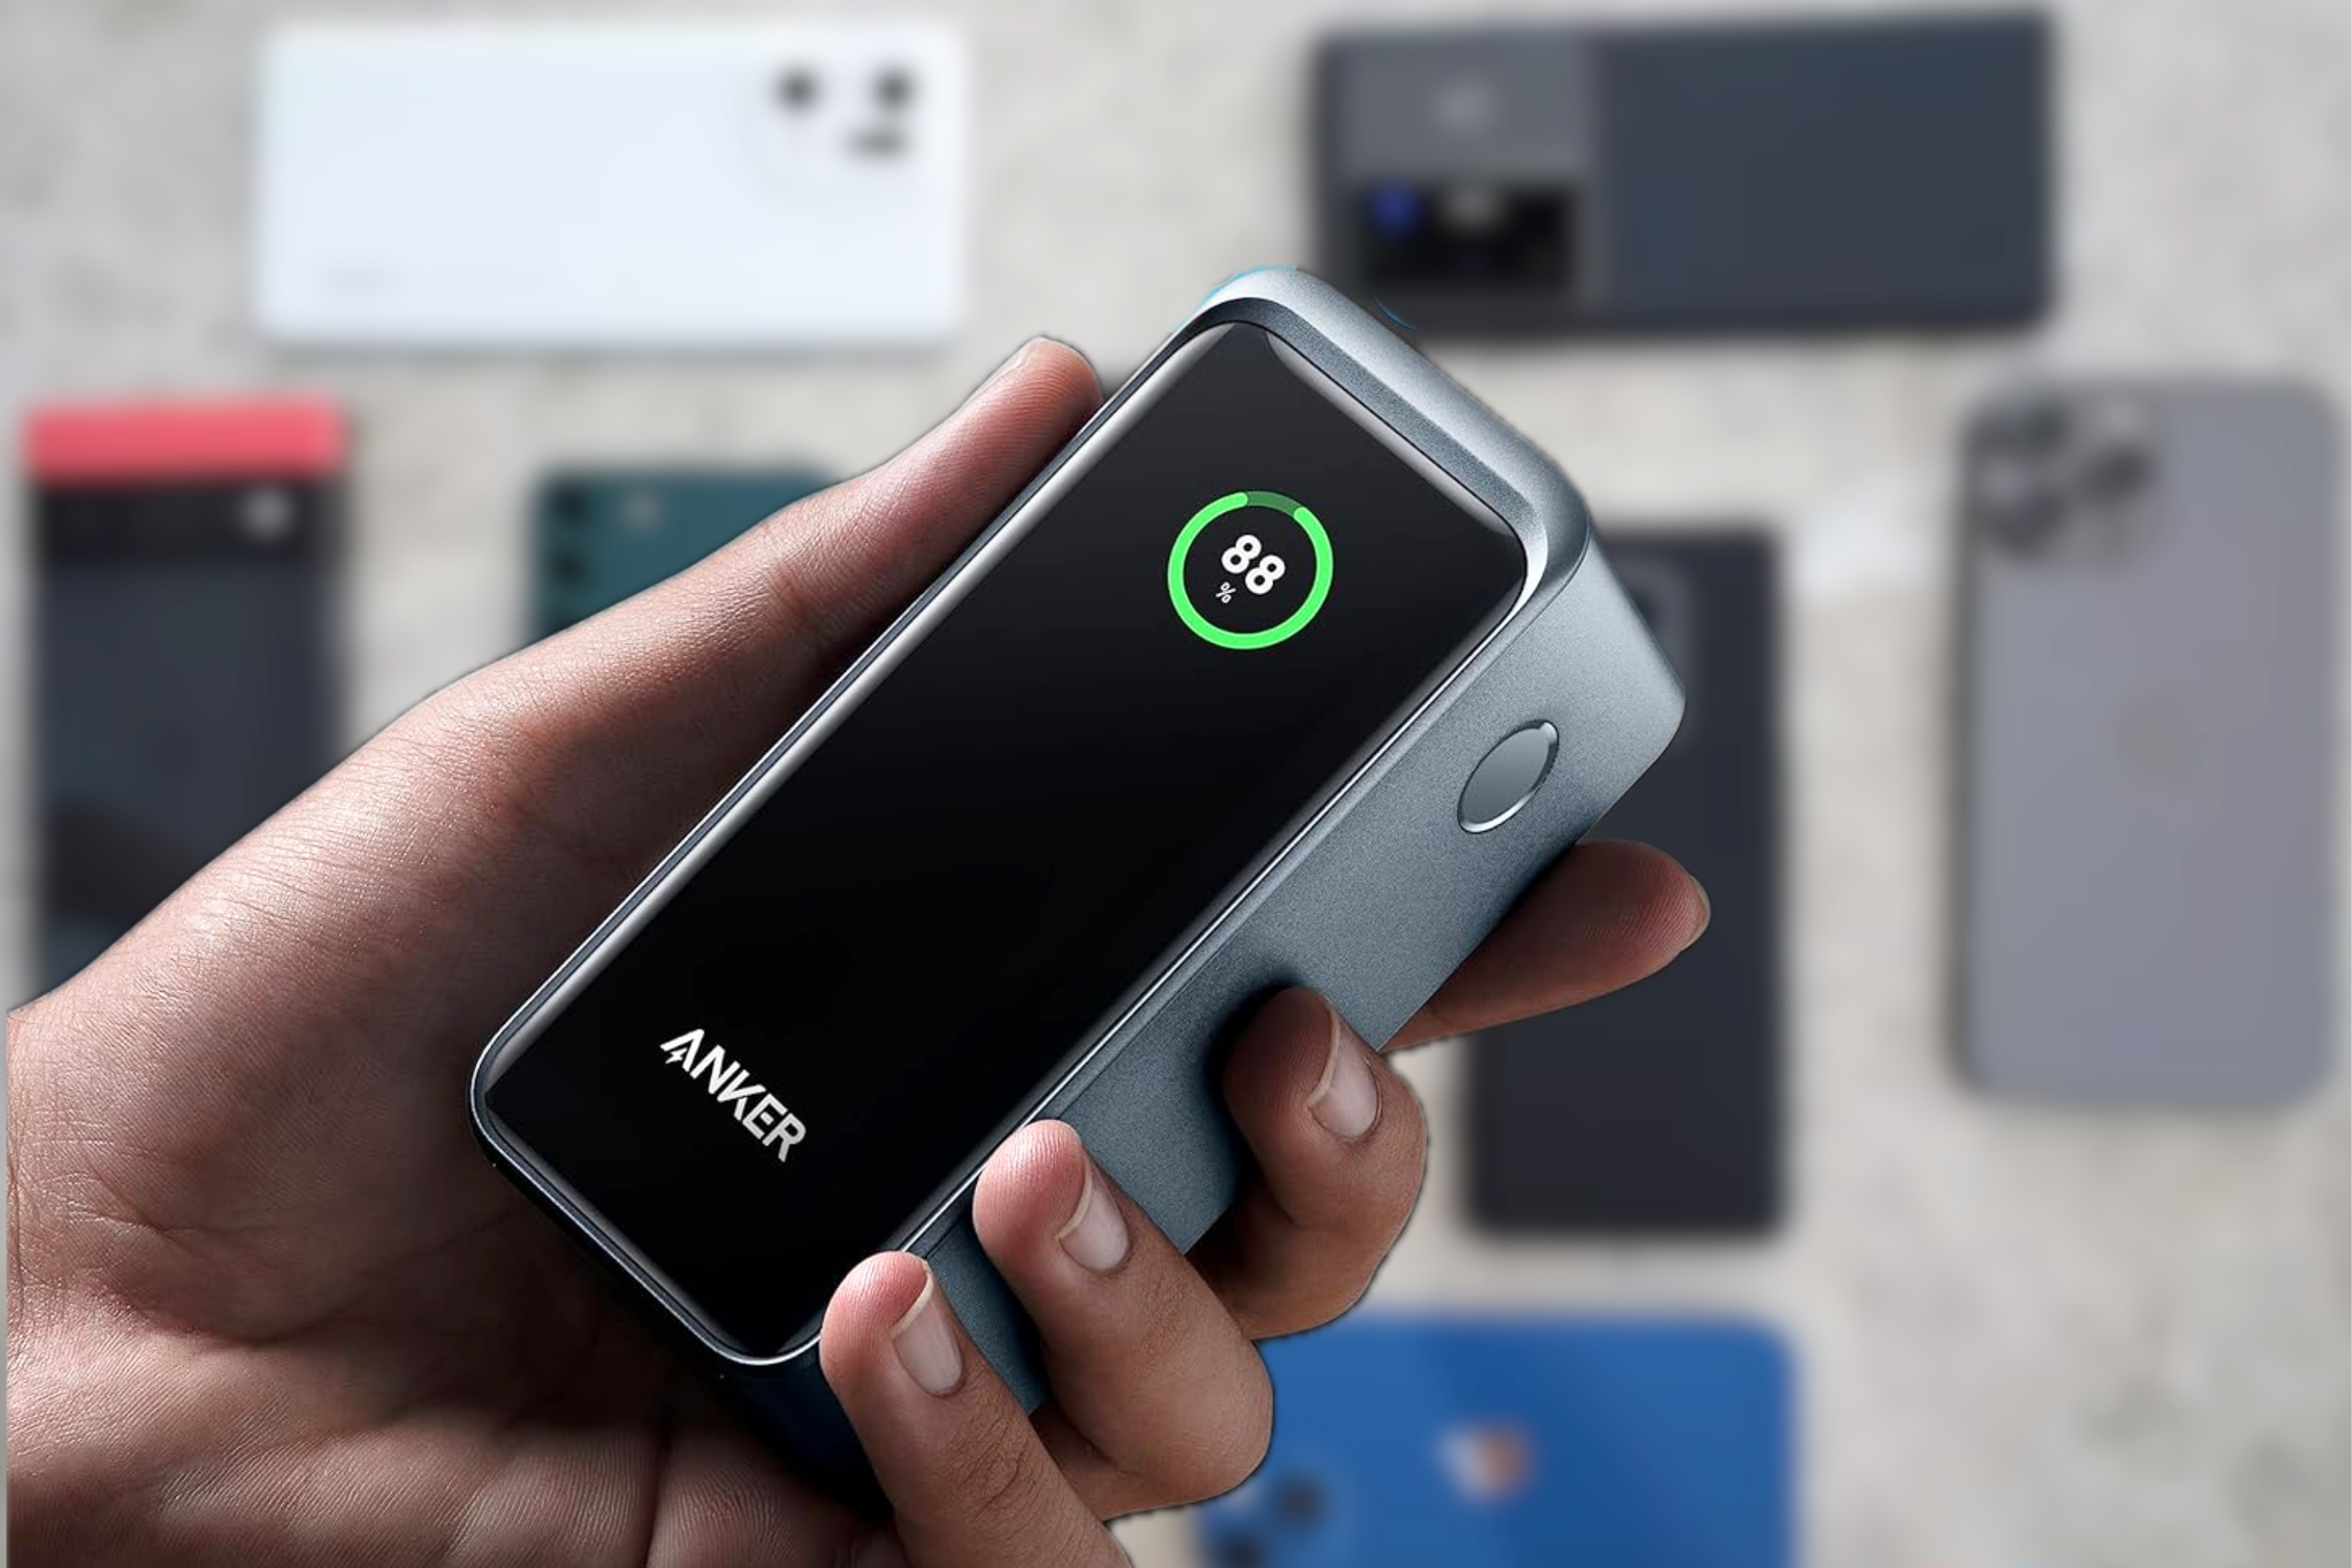  Anker Prime Power Bank in hand with phones in background